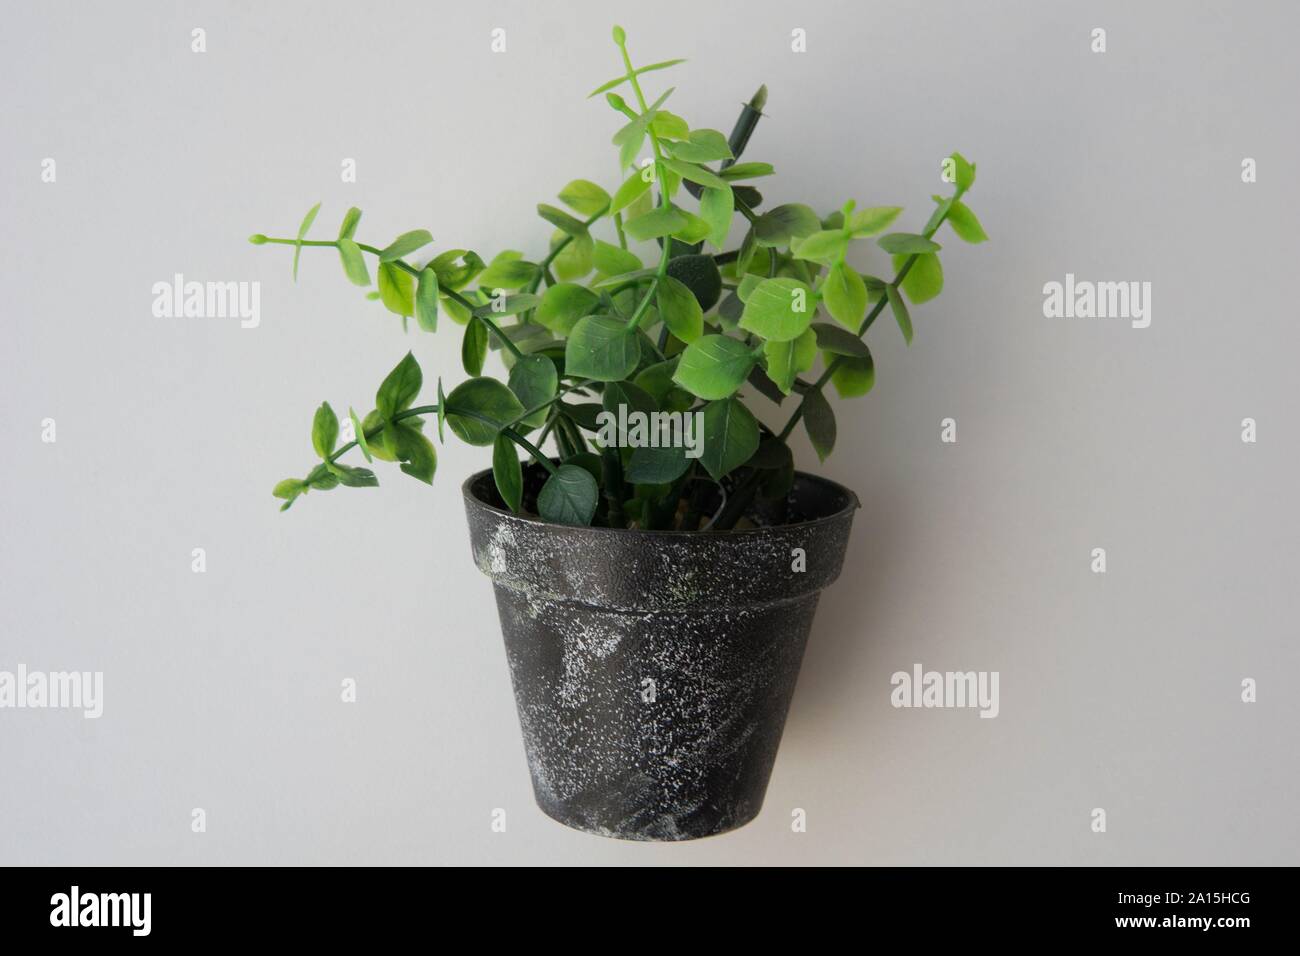 Potted plastic plants and flowers for decorations. Container made of aluminium, plastic, ceramic as well as clay. Plants include Cactus, cacti, beauti Stock Photo